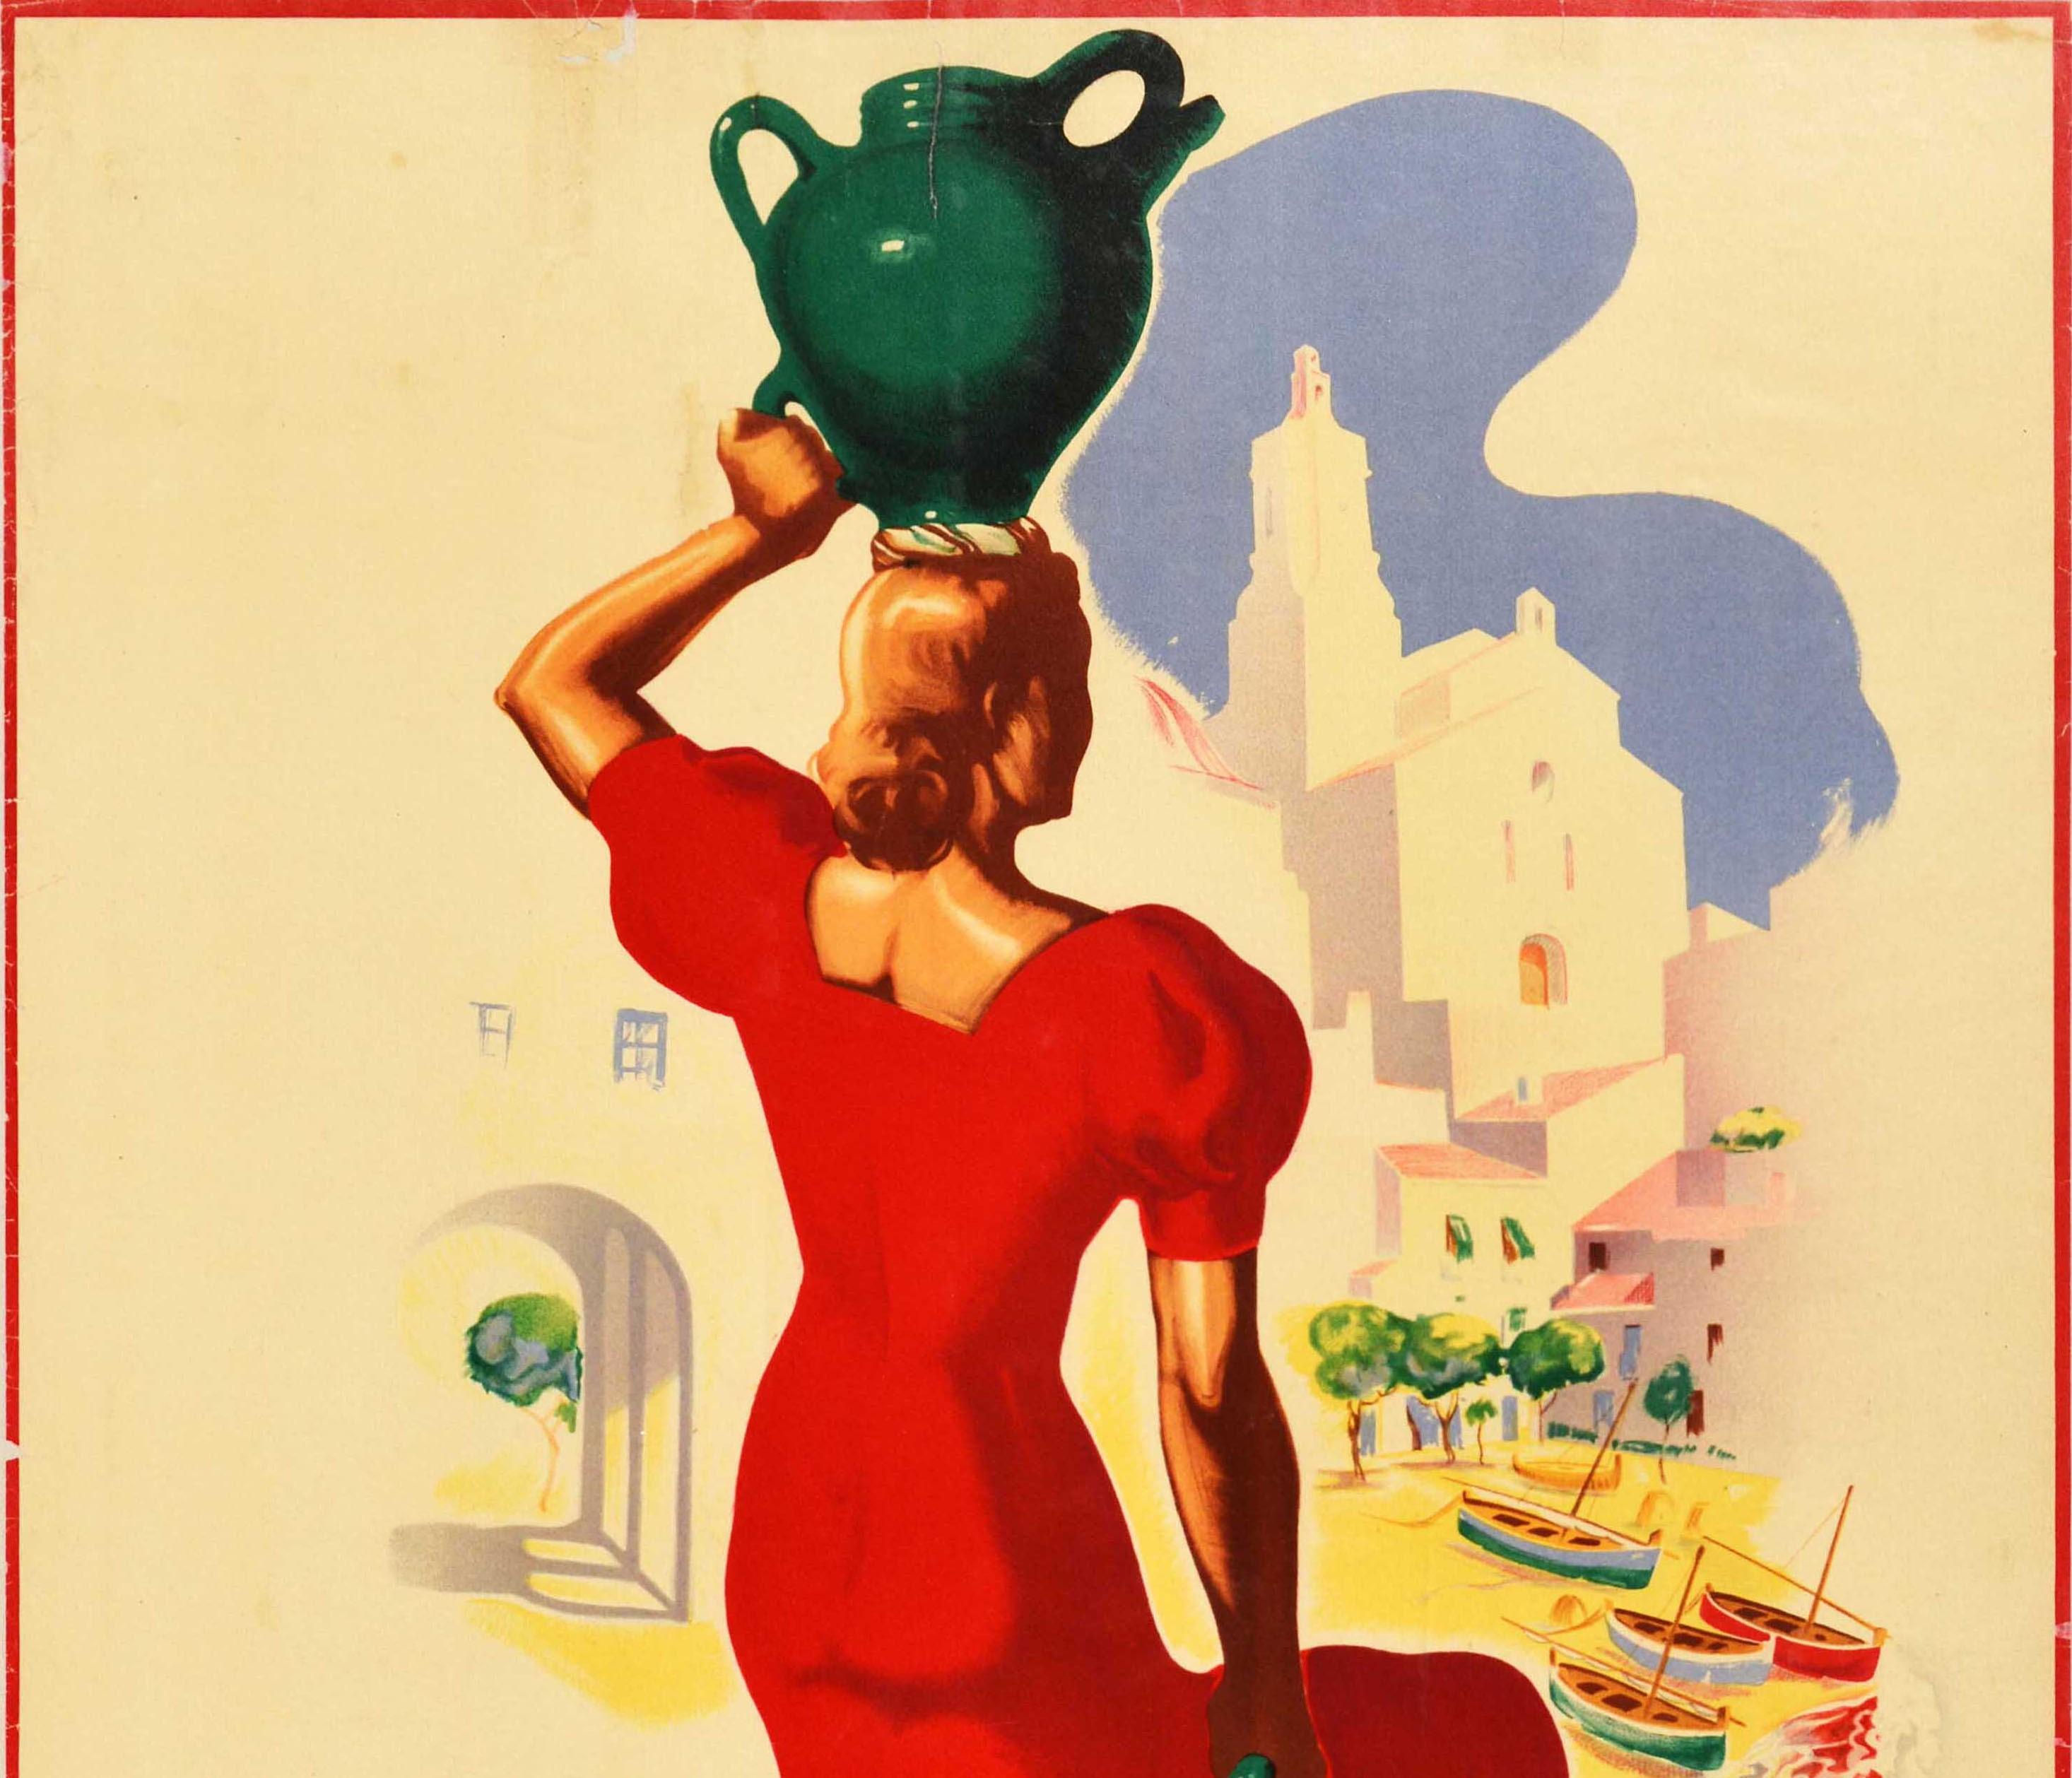 Original vintage travel advertising poster for Espana / Spain featuring an illustration by the Spanish artist Jose Morell (1899-1949) depicting a lady in red holding a jug in one hand and another jug on her head, walking towards town buildings with